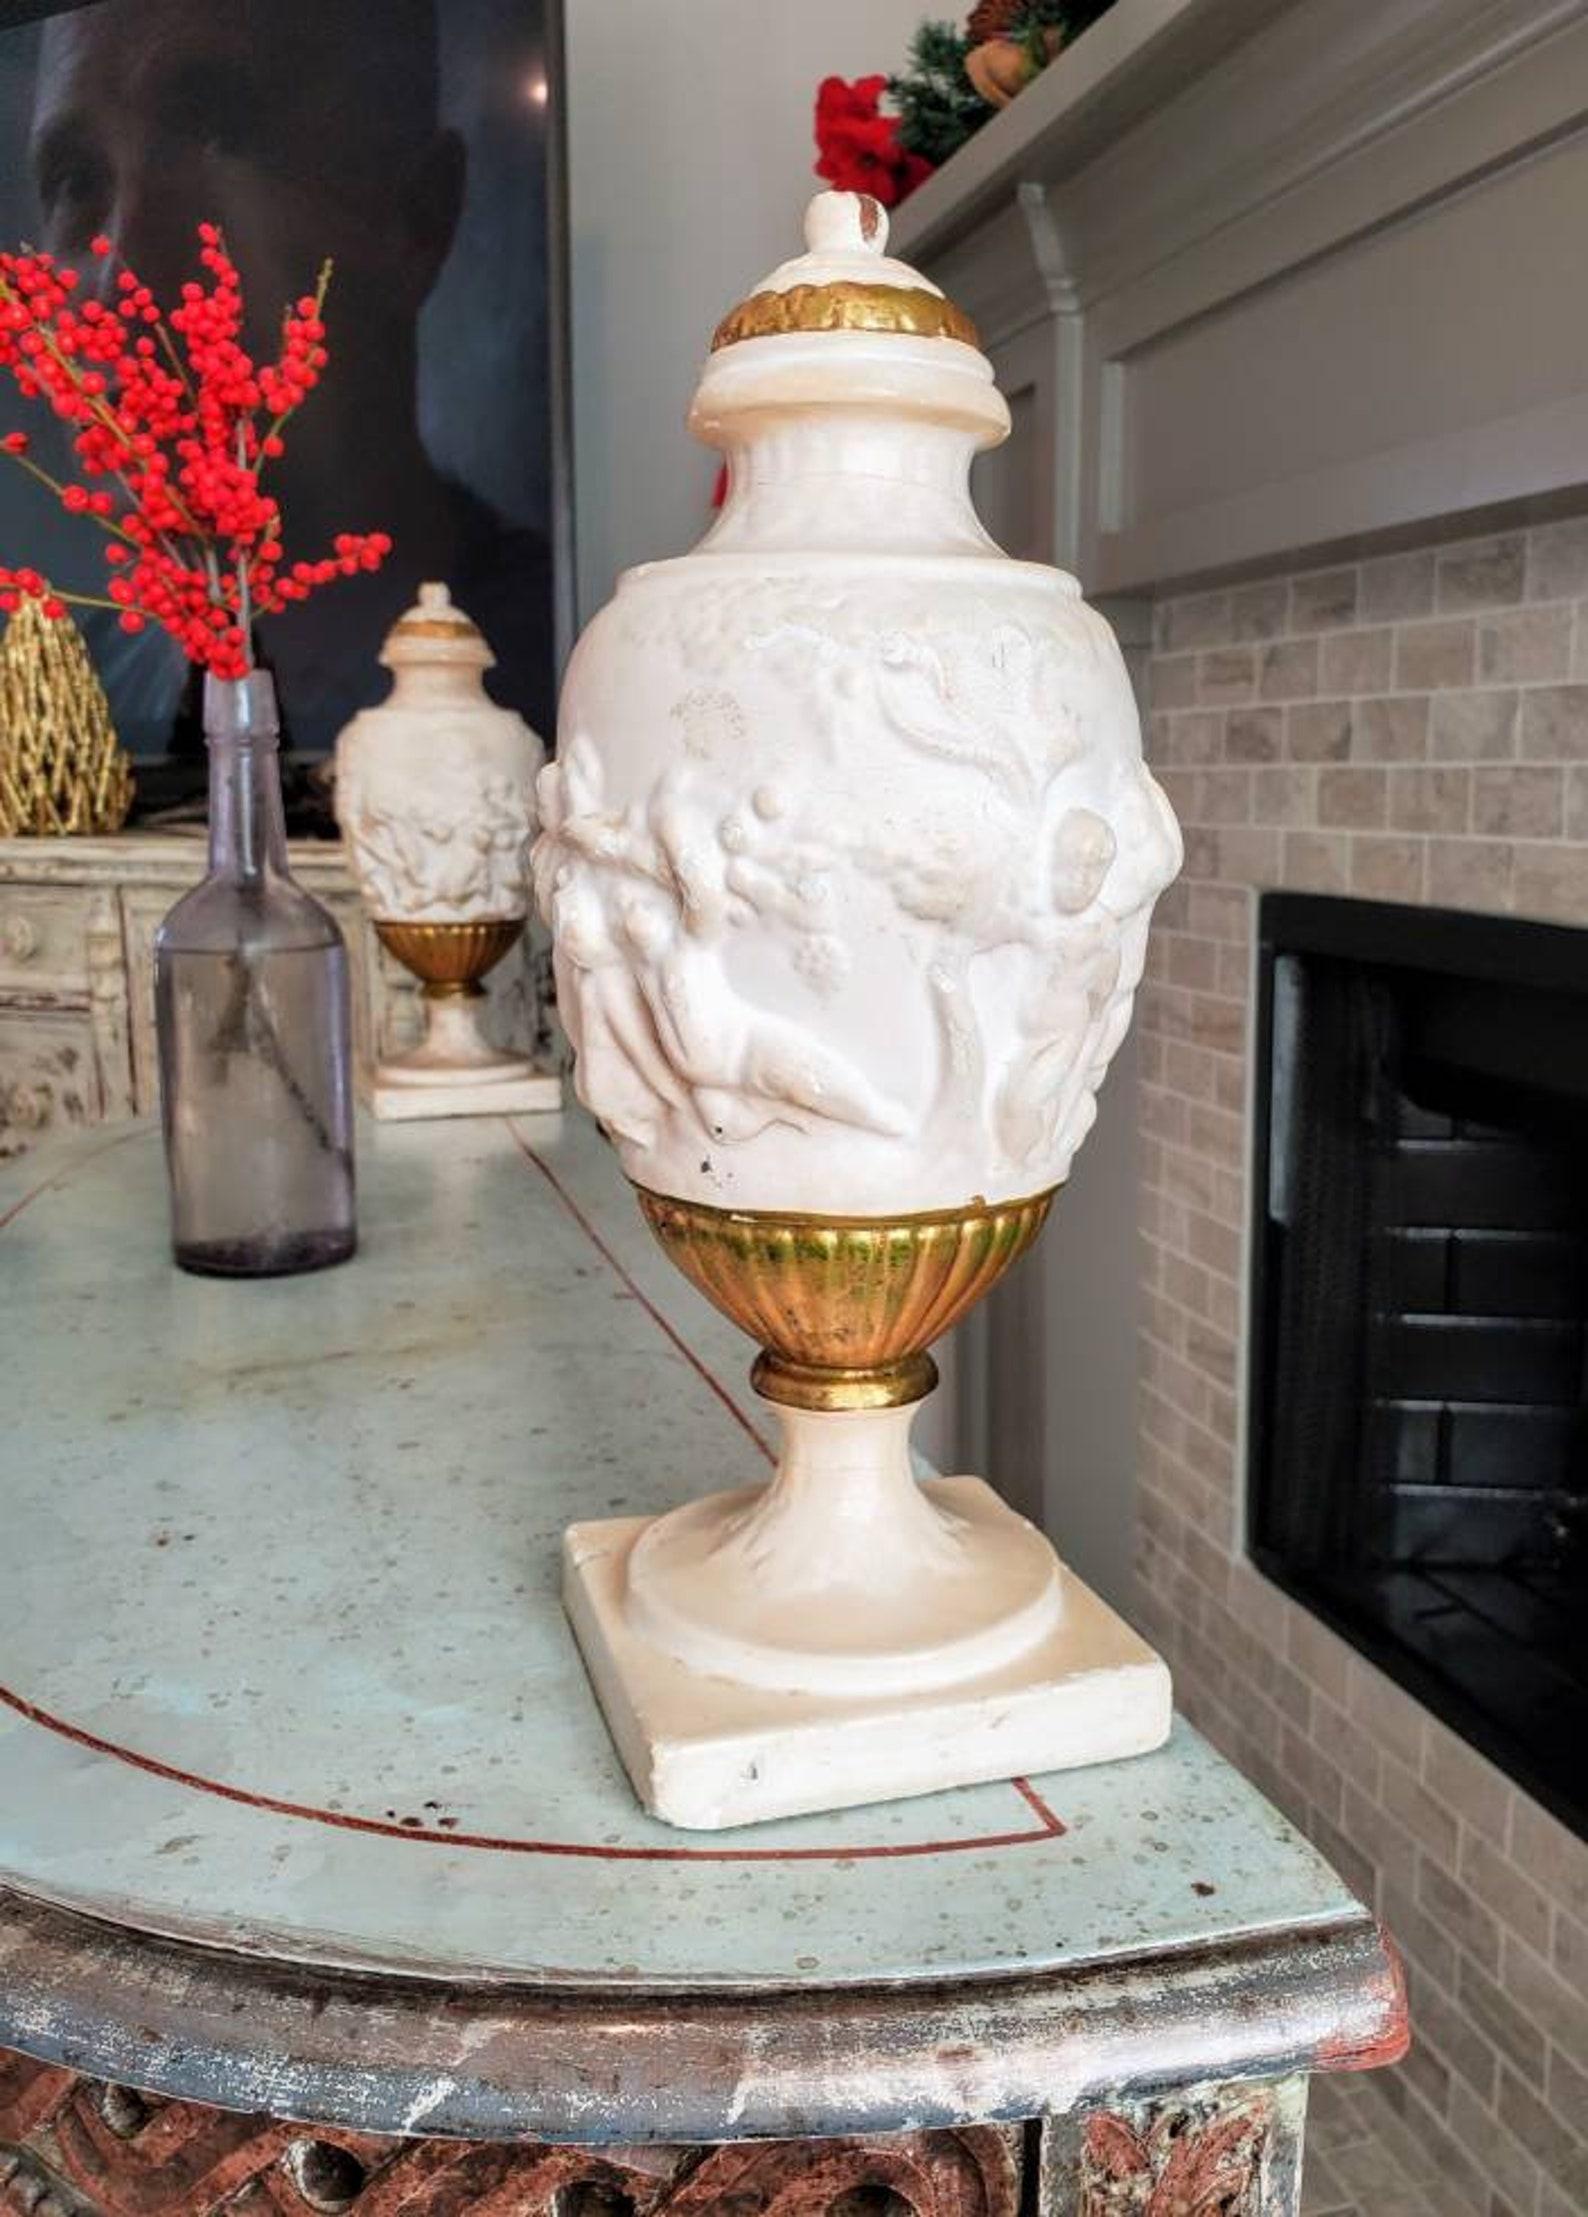 A stunning pair of antique Italian Neo-classical faux marble wooden urns.

Born in Italy around the 18th/early 19th century, sculptural lidded urn architectural element form, hand carved from a single block of wood, exquisitely decorated in